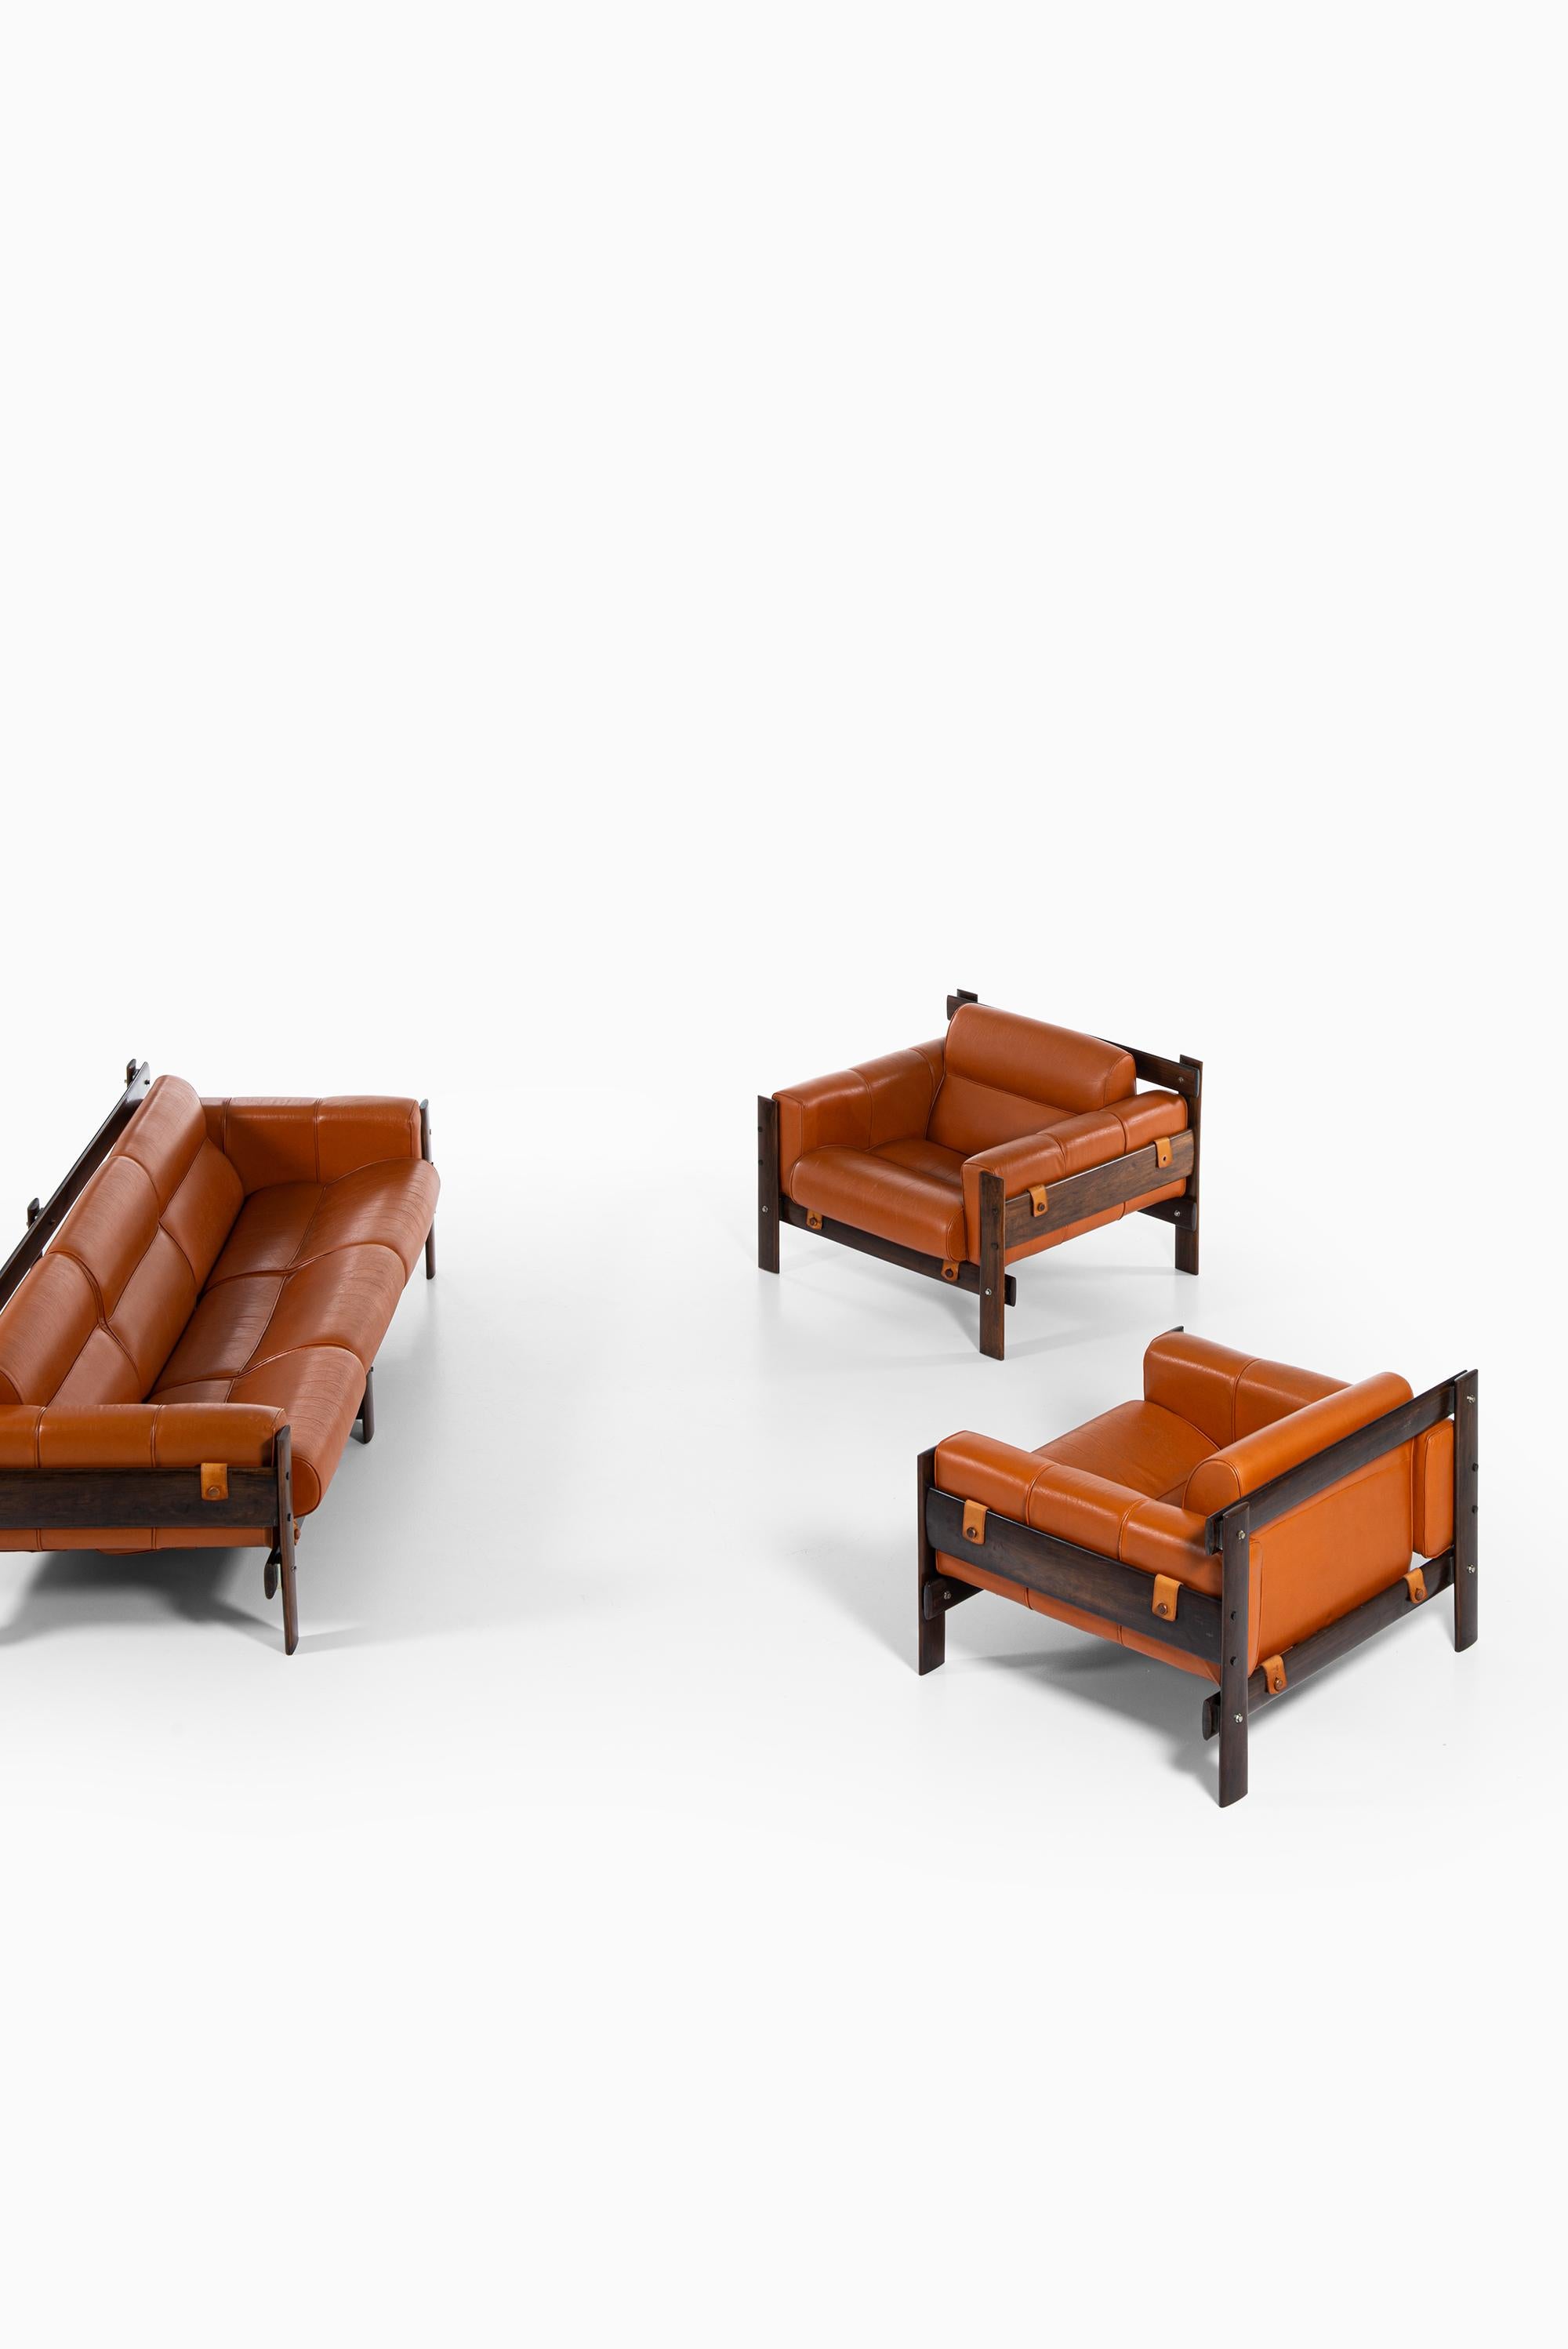 Percival Lafer Sofa in Rosewood and Leather by Lafer MP in Brazil 4